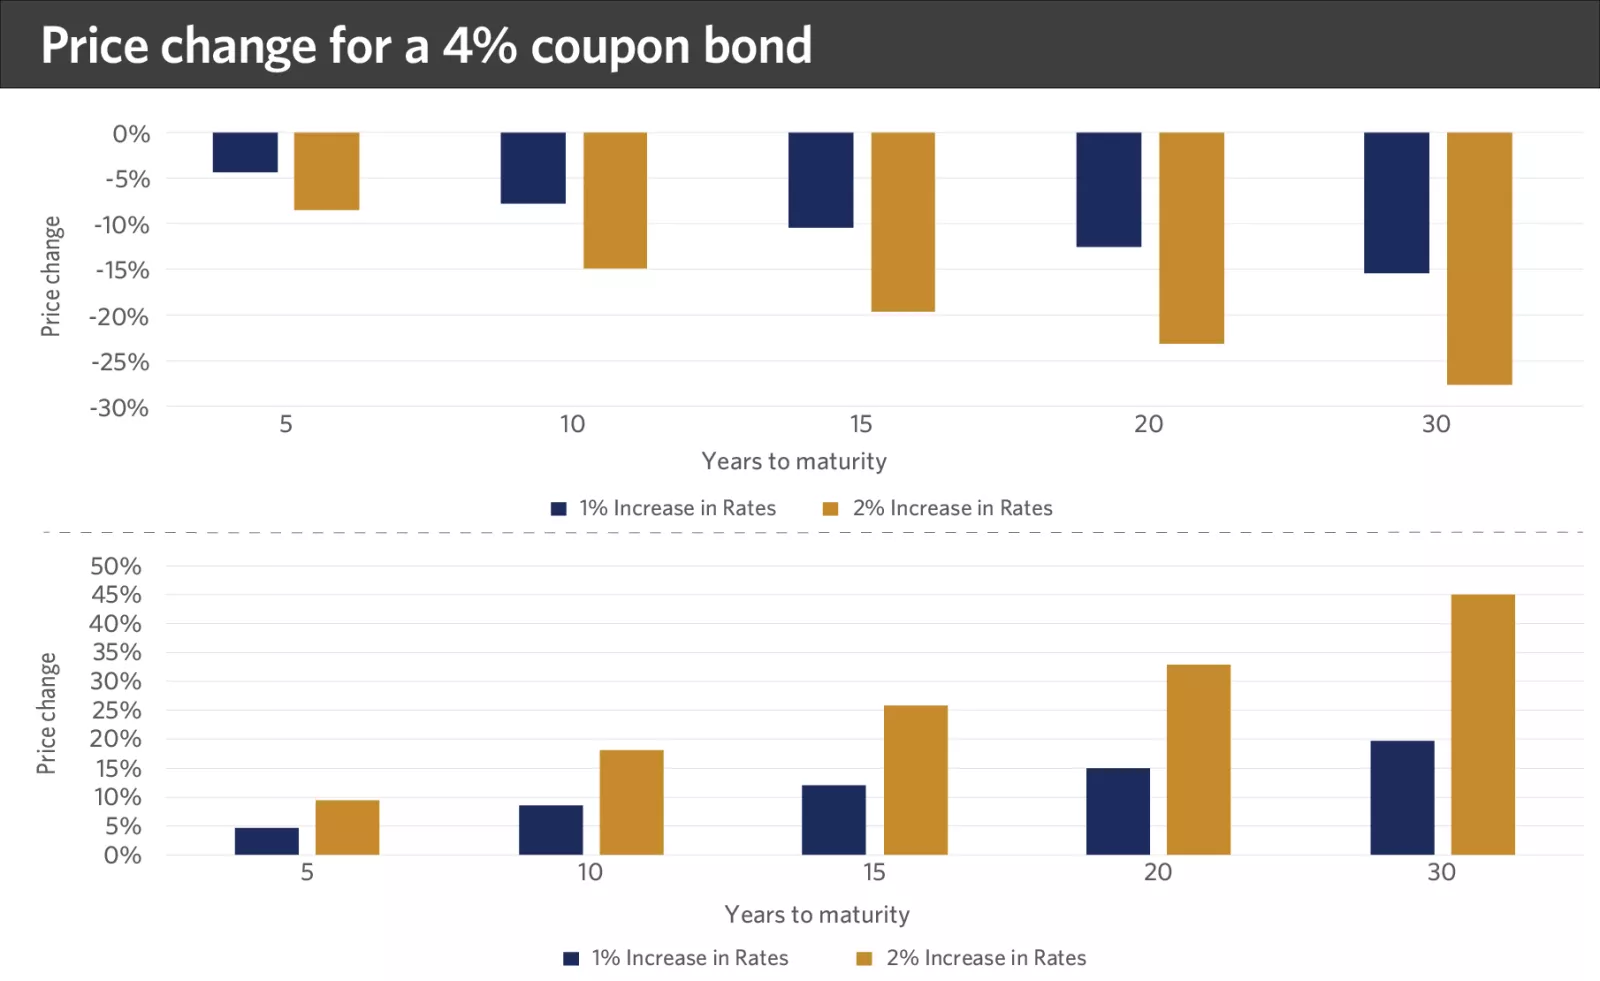 price change for a 4% coupon bond chart